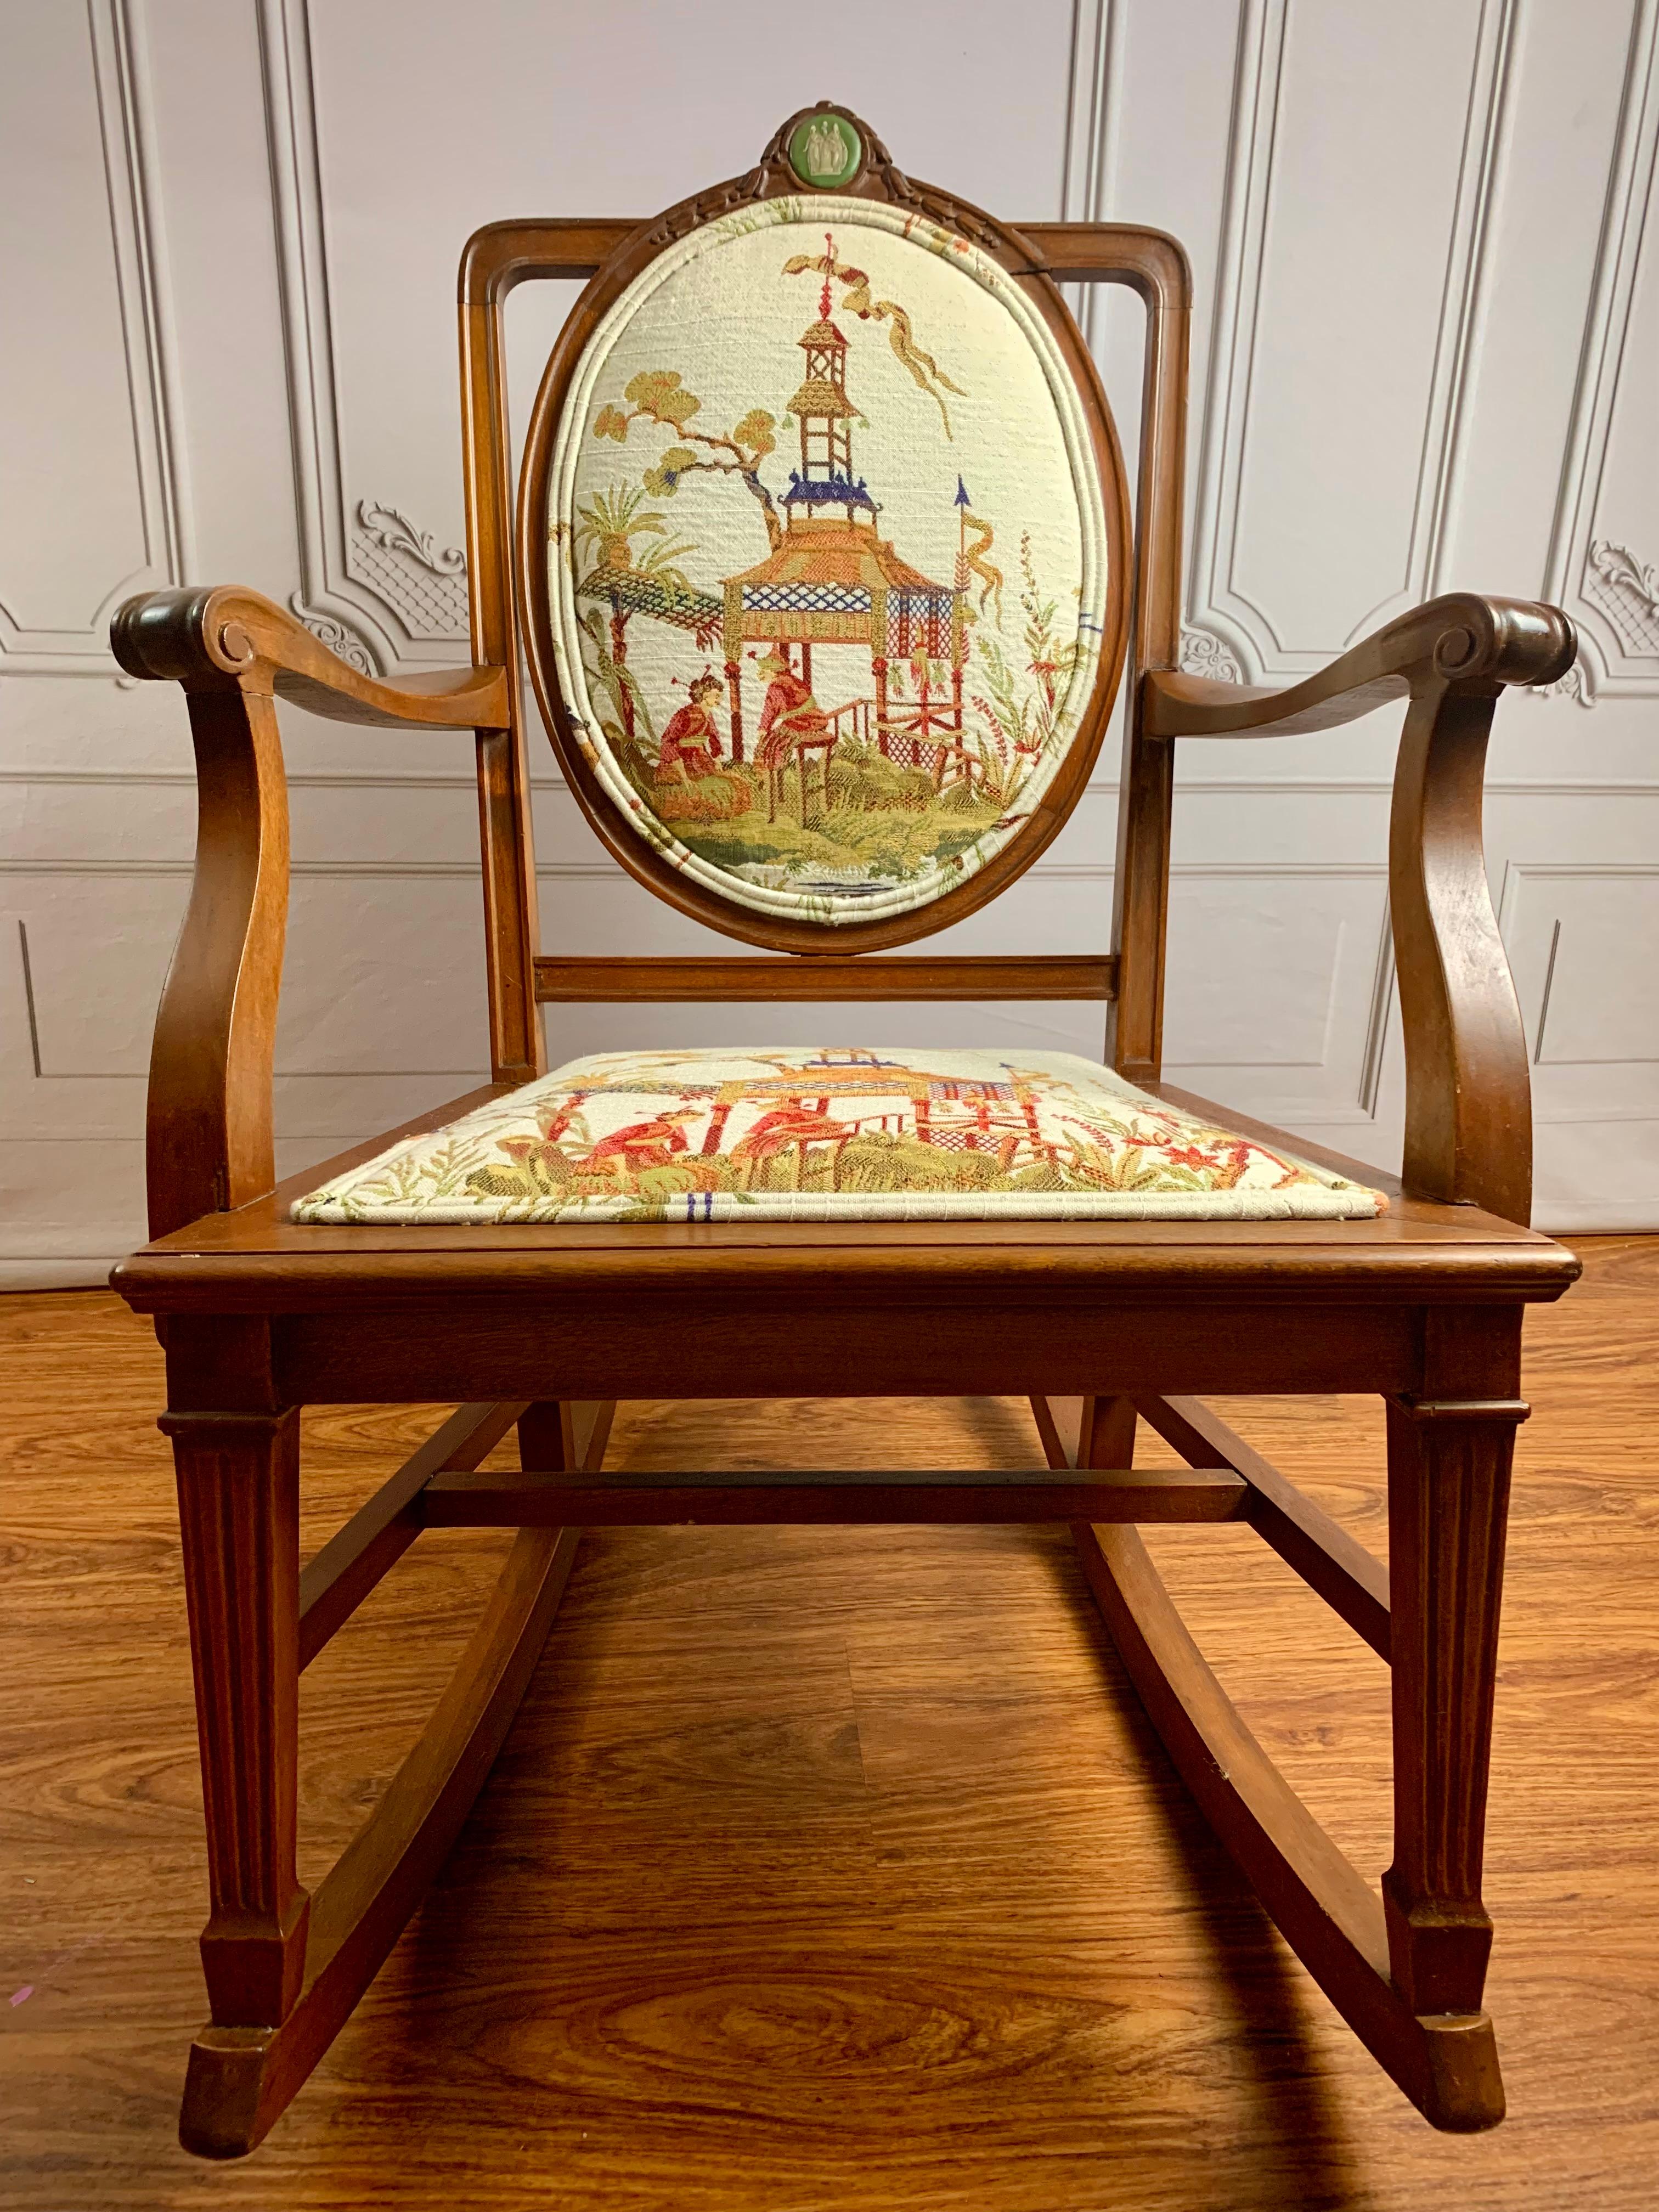 Antique English Chinoiserie Upholstered Rocking Chair w/ Wedgwood Medallion For Sale 5